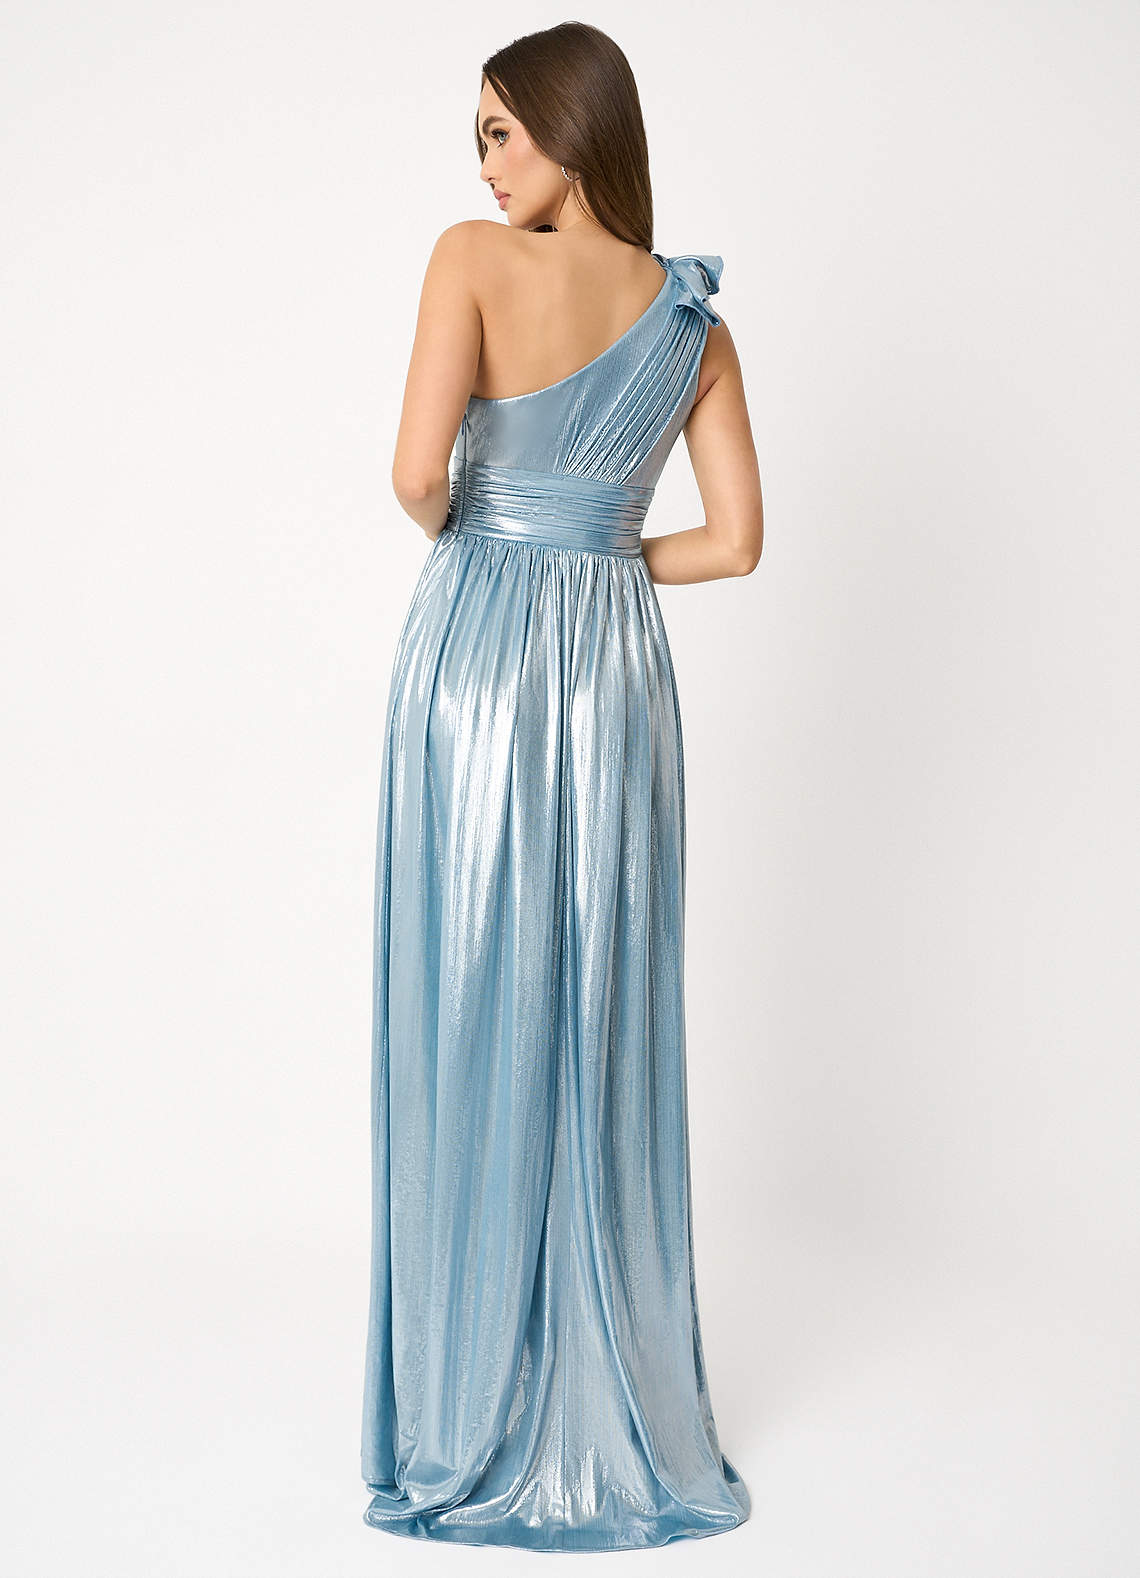 Ivy Aqua Blue Pleated Gown image4